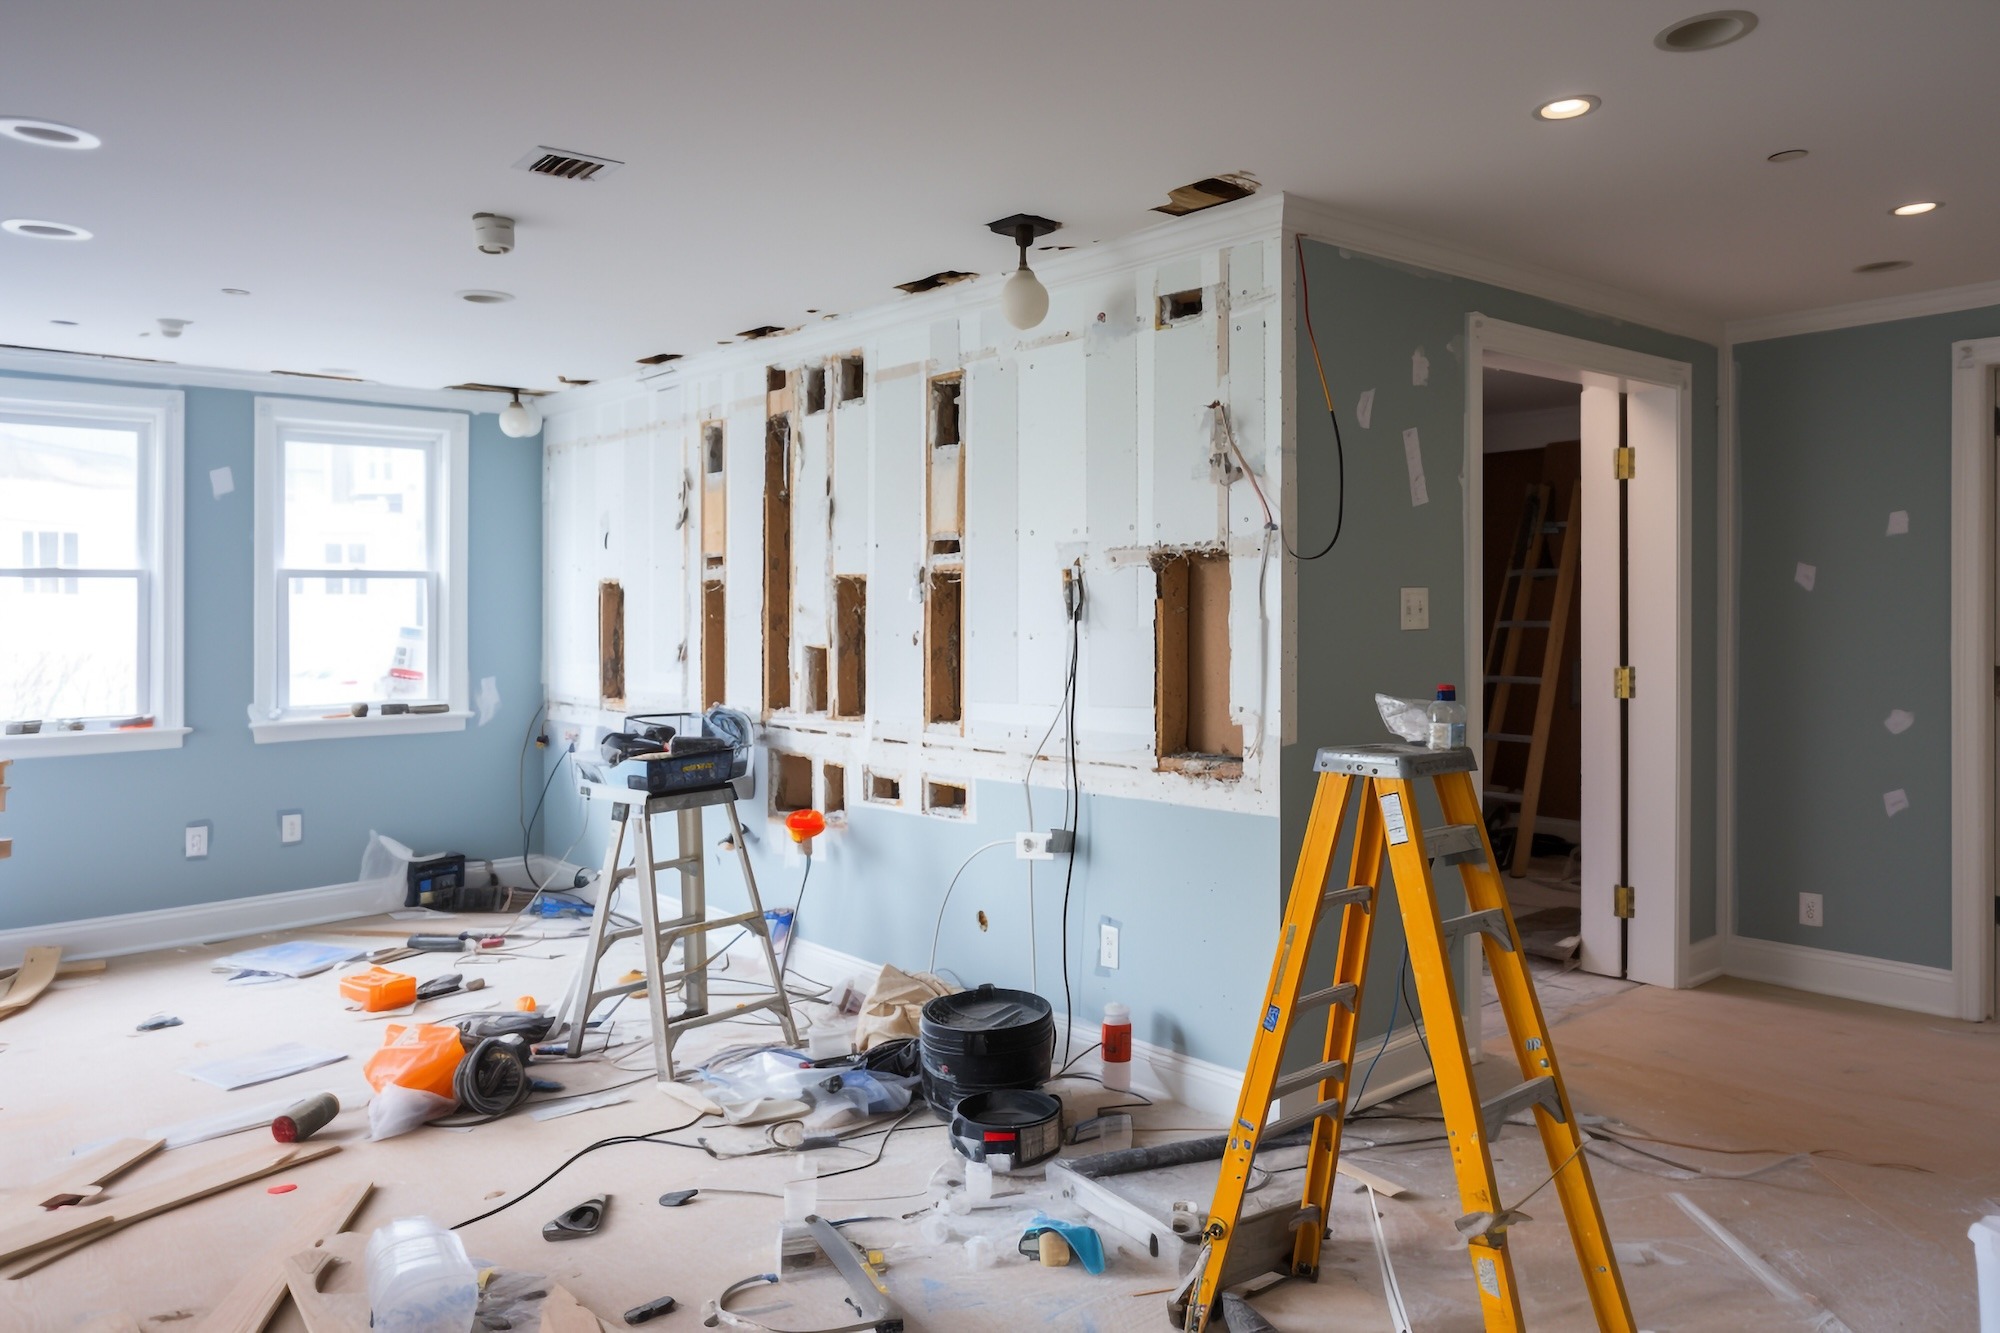 Home Downsizing. An image of a living room being completely renovated. Bare floors, walls and ceiling being renovated. Ladders, worktables and construction equipment on the dusty and cluttered floor.